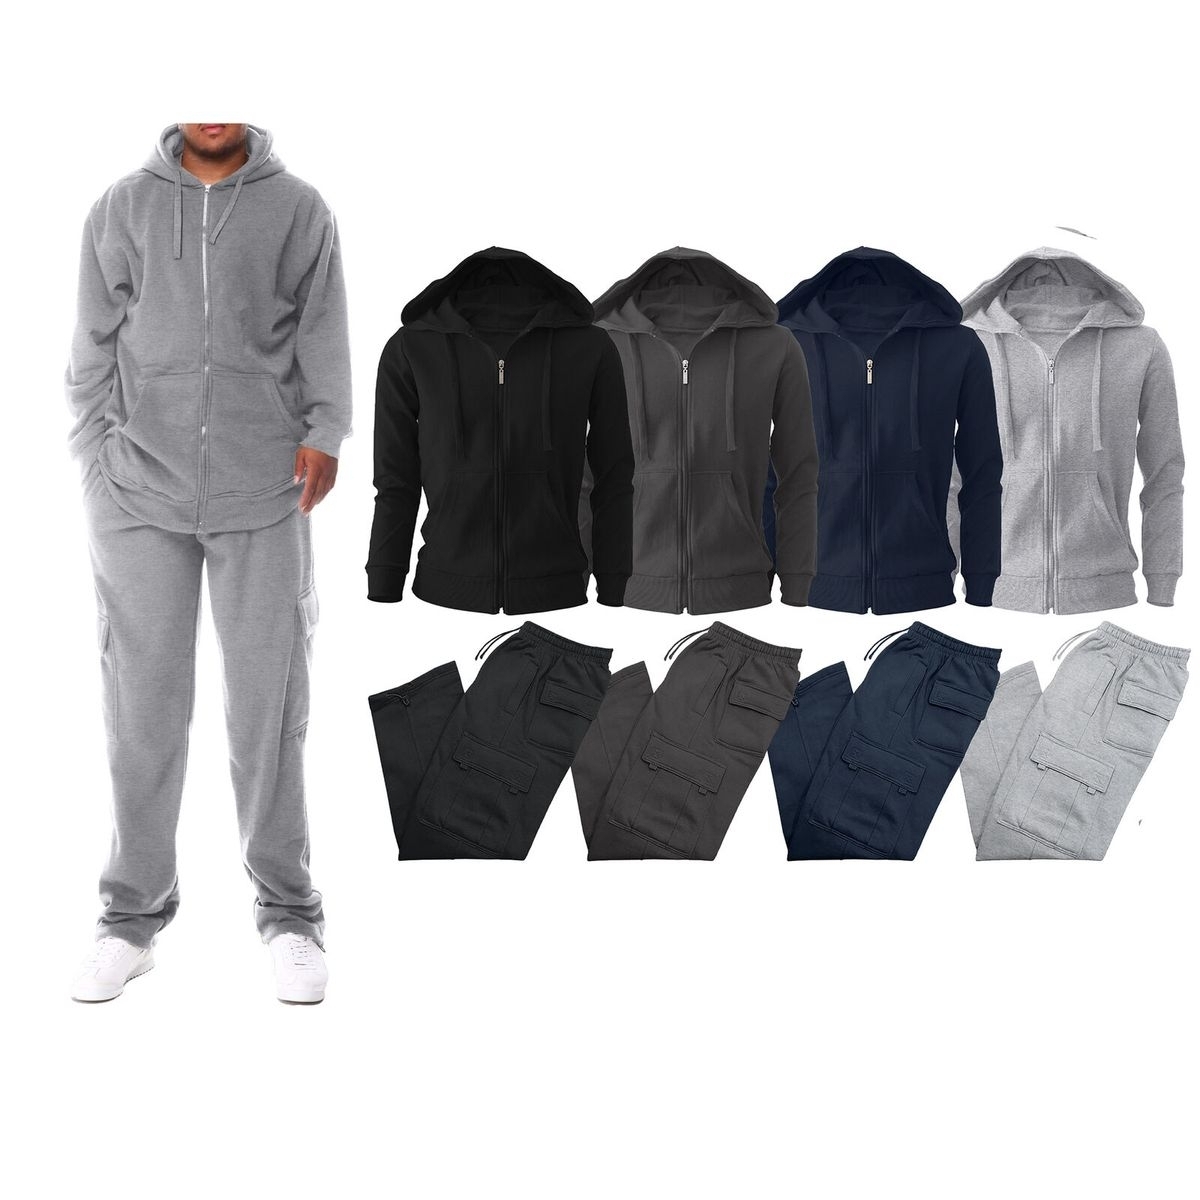 Multi-Pack: Men's Big & Tall Winter Warm Athletic Active Cozy Fleece Lined Multi-Pocket Full Zip Up Cargo Tracksuit - Grey, 2-pack, X-large